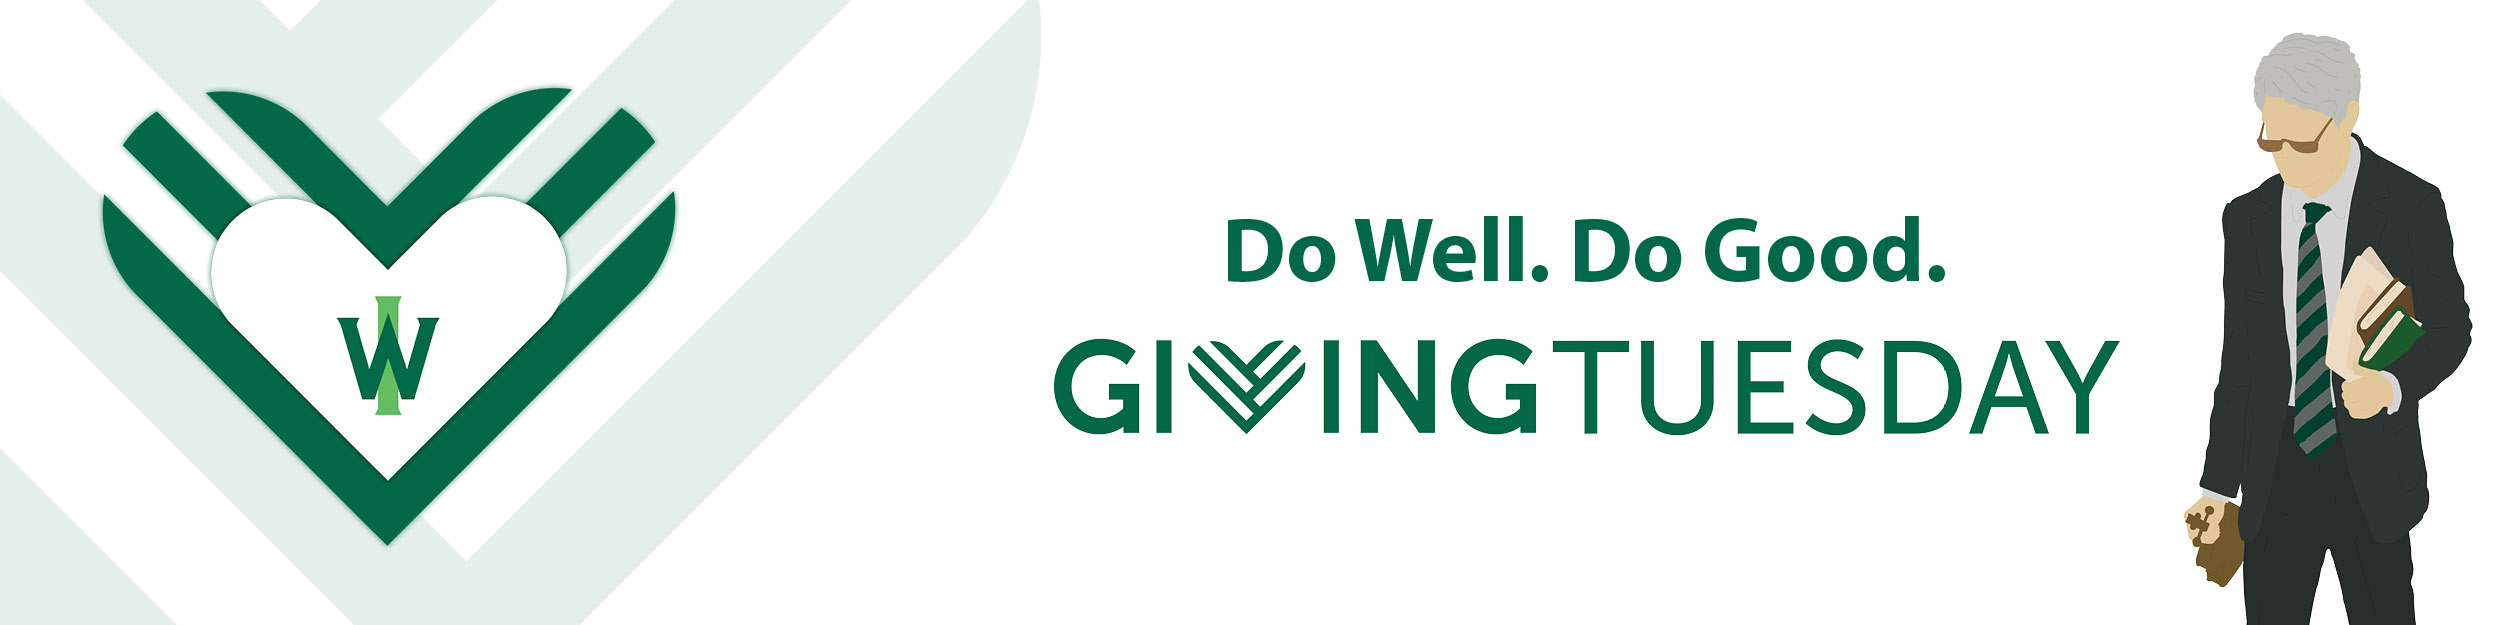 Giving Tuesday email header